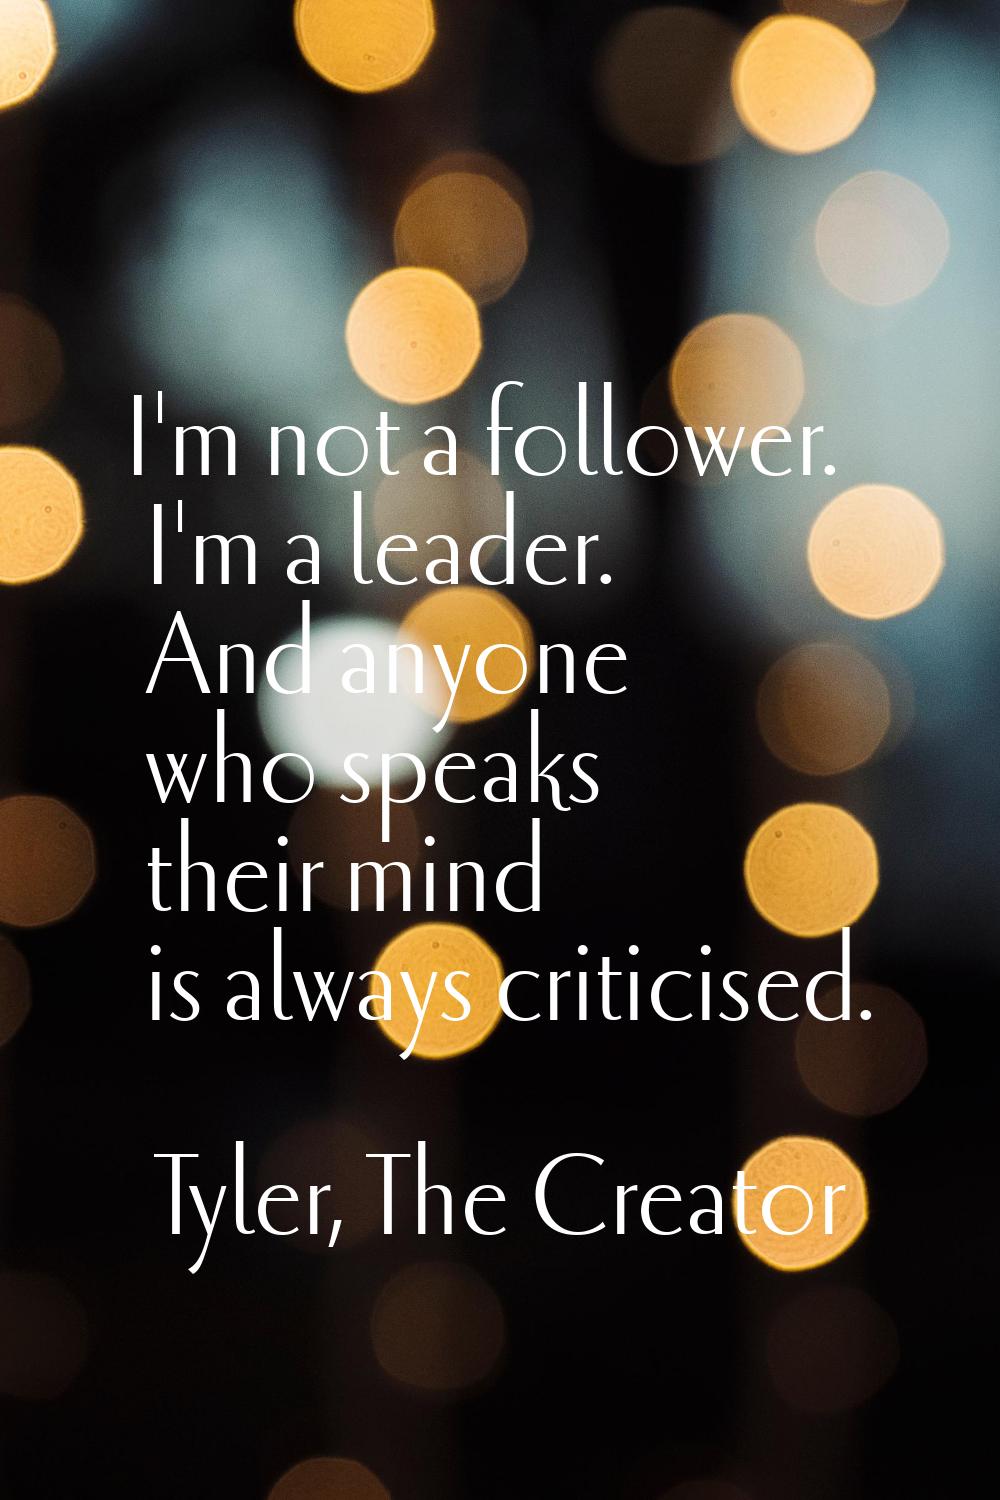 I'm not a follower. I'm a leader. And anyone who speaks their mind is always criticised.